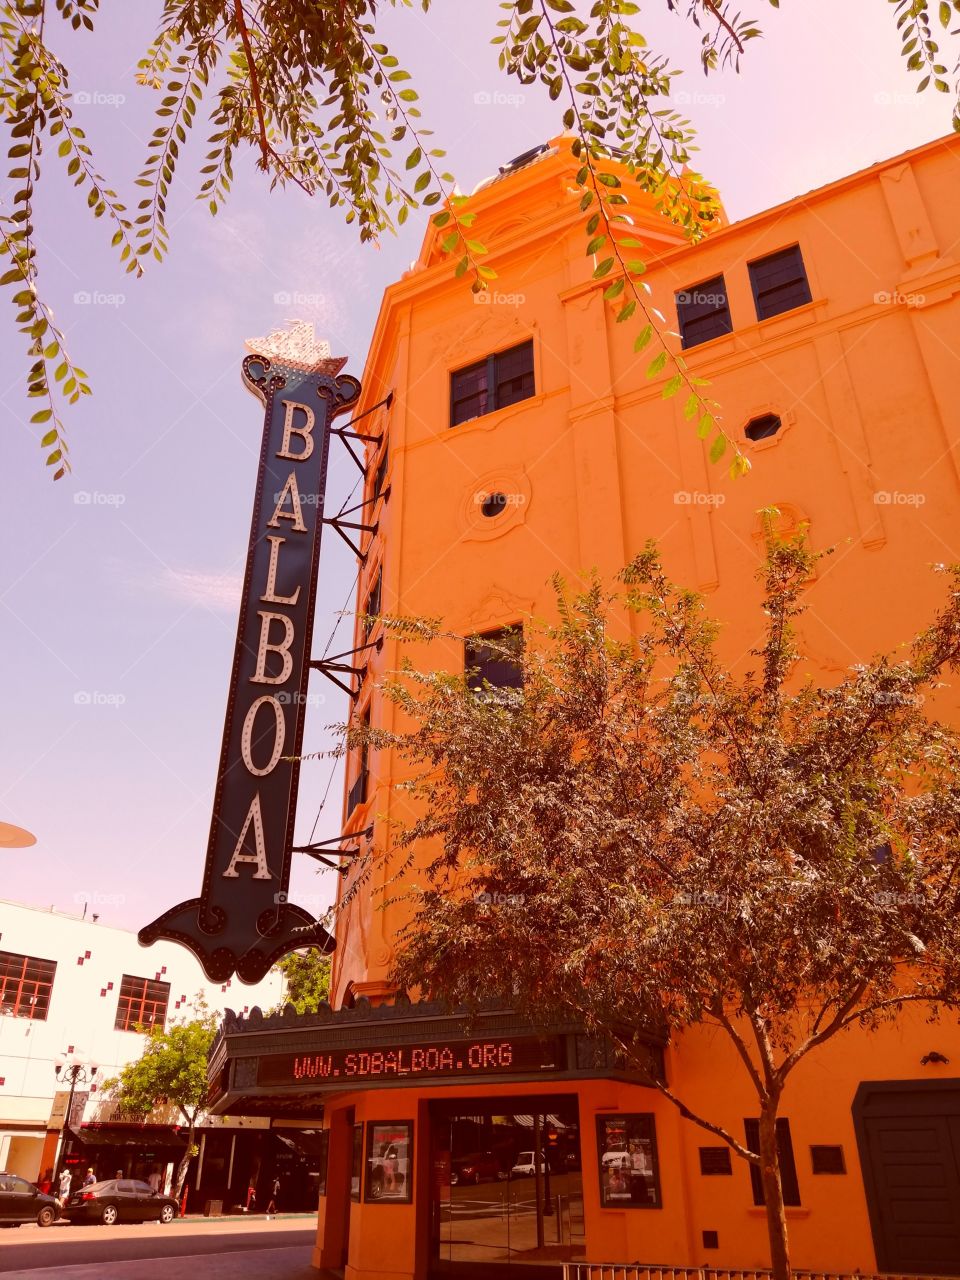 Balboa theater, part of San Diego's history, at the heart of the city.